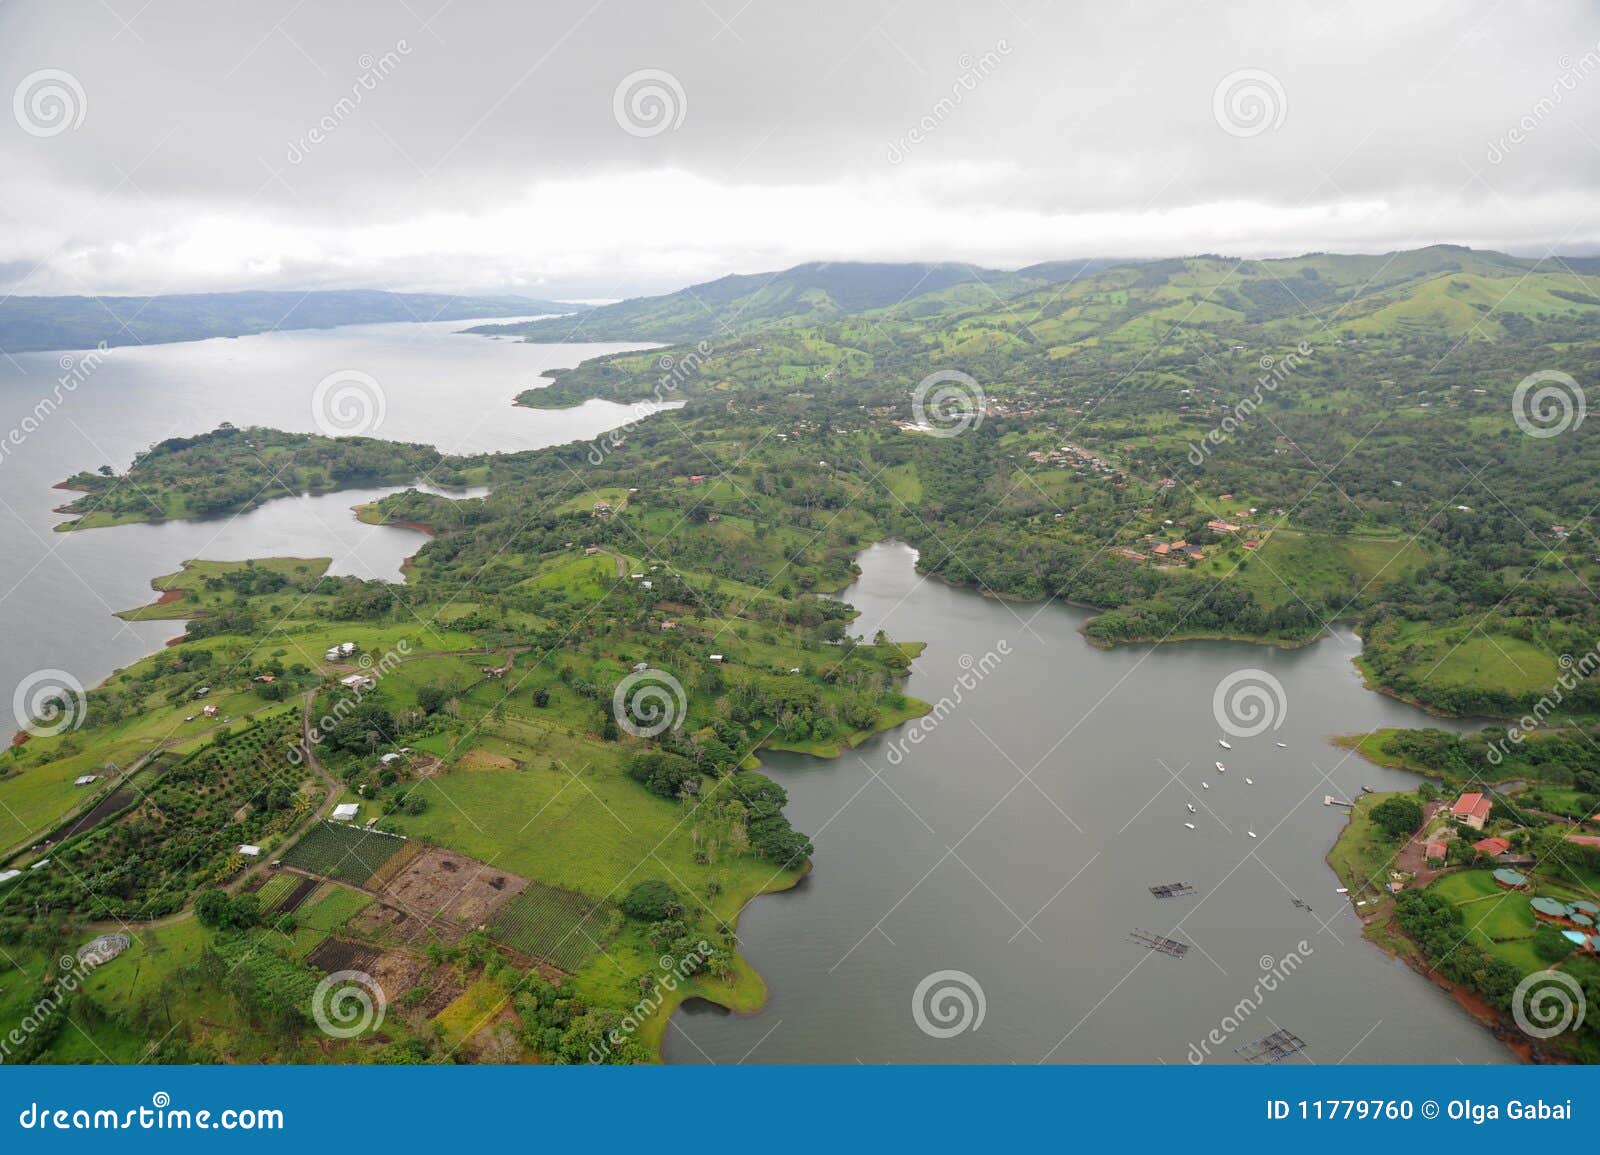 aerial view in costa rica